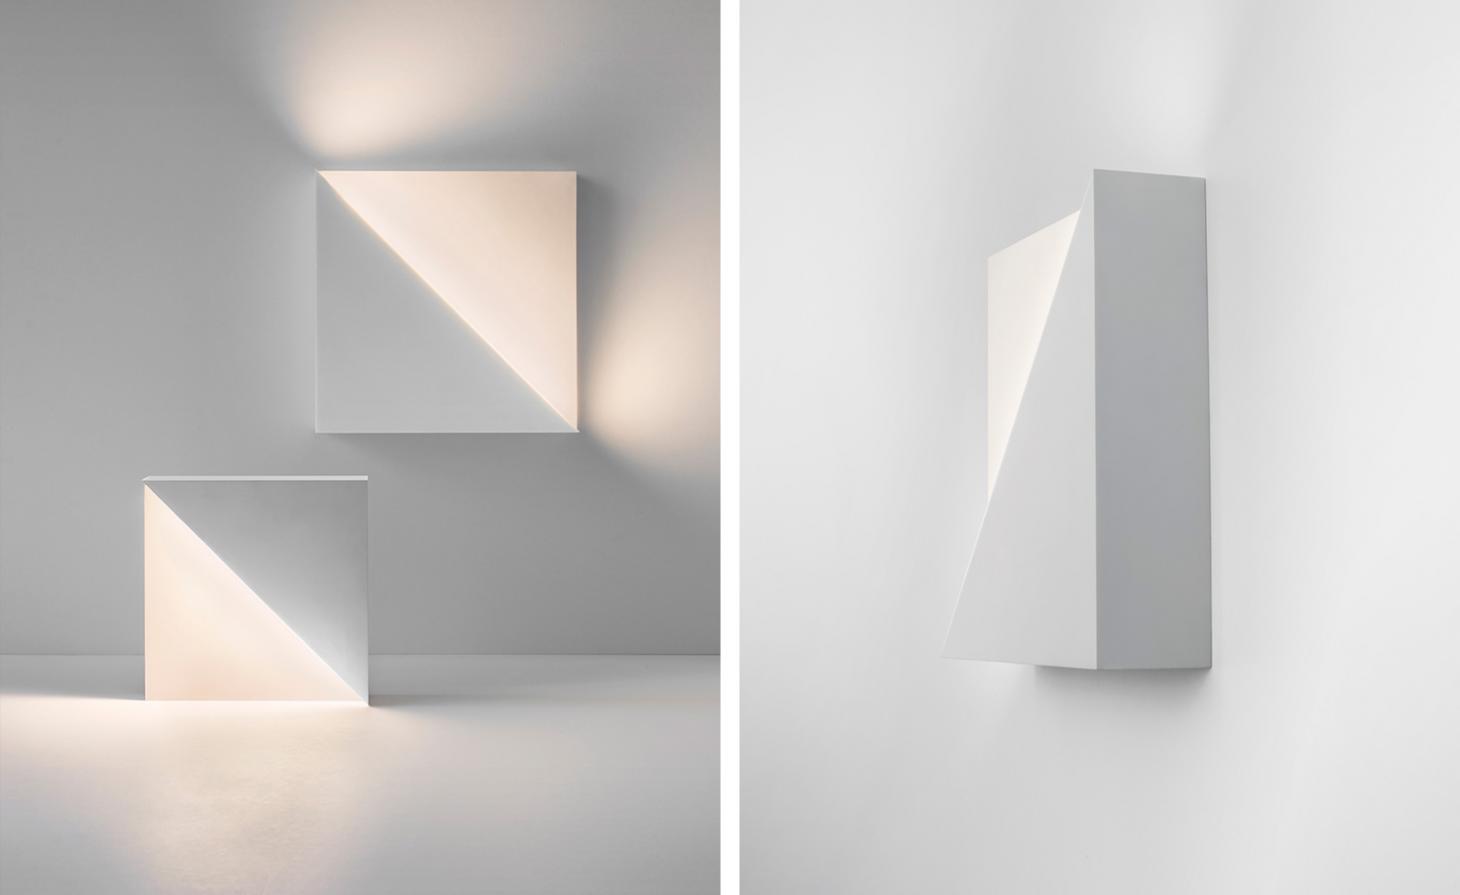 richard meier debuts new lighting collection at ralph pucci gallery new york-14